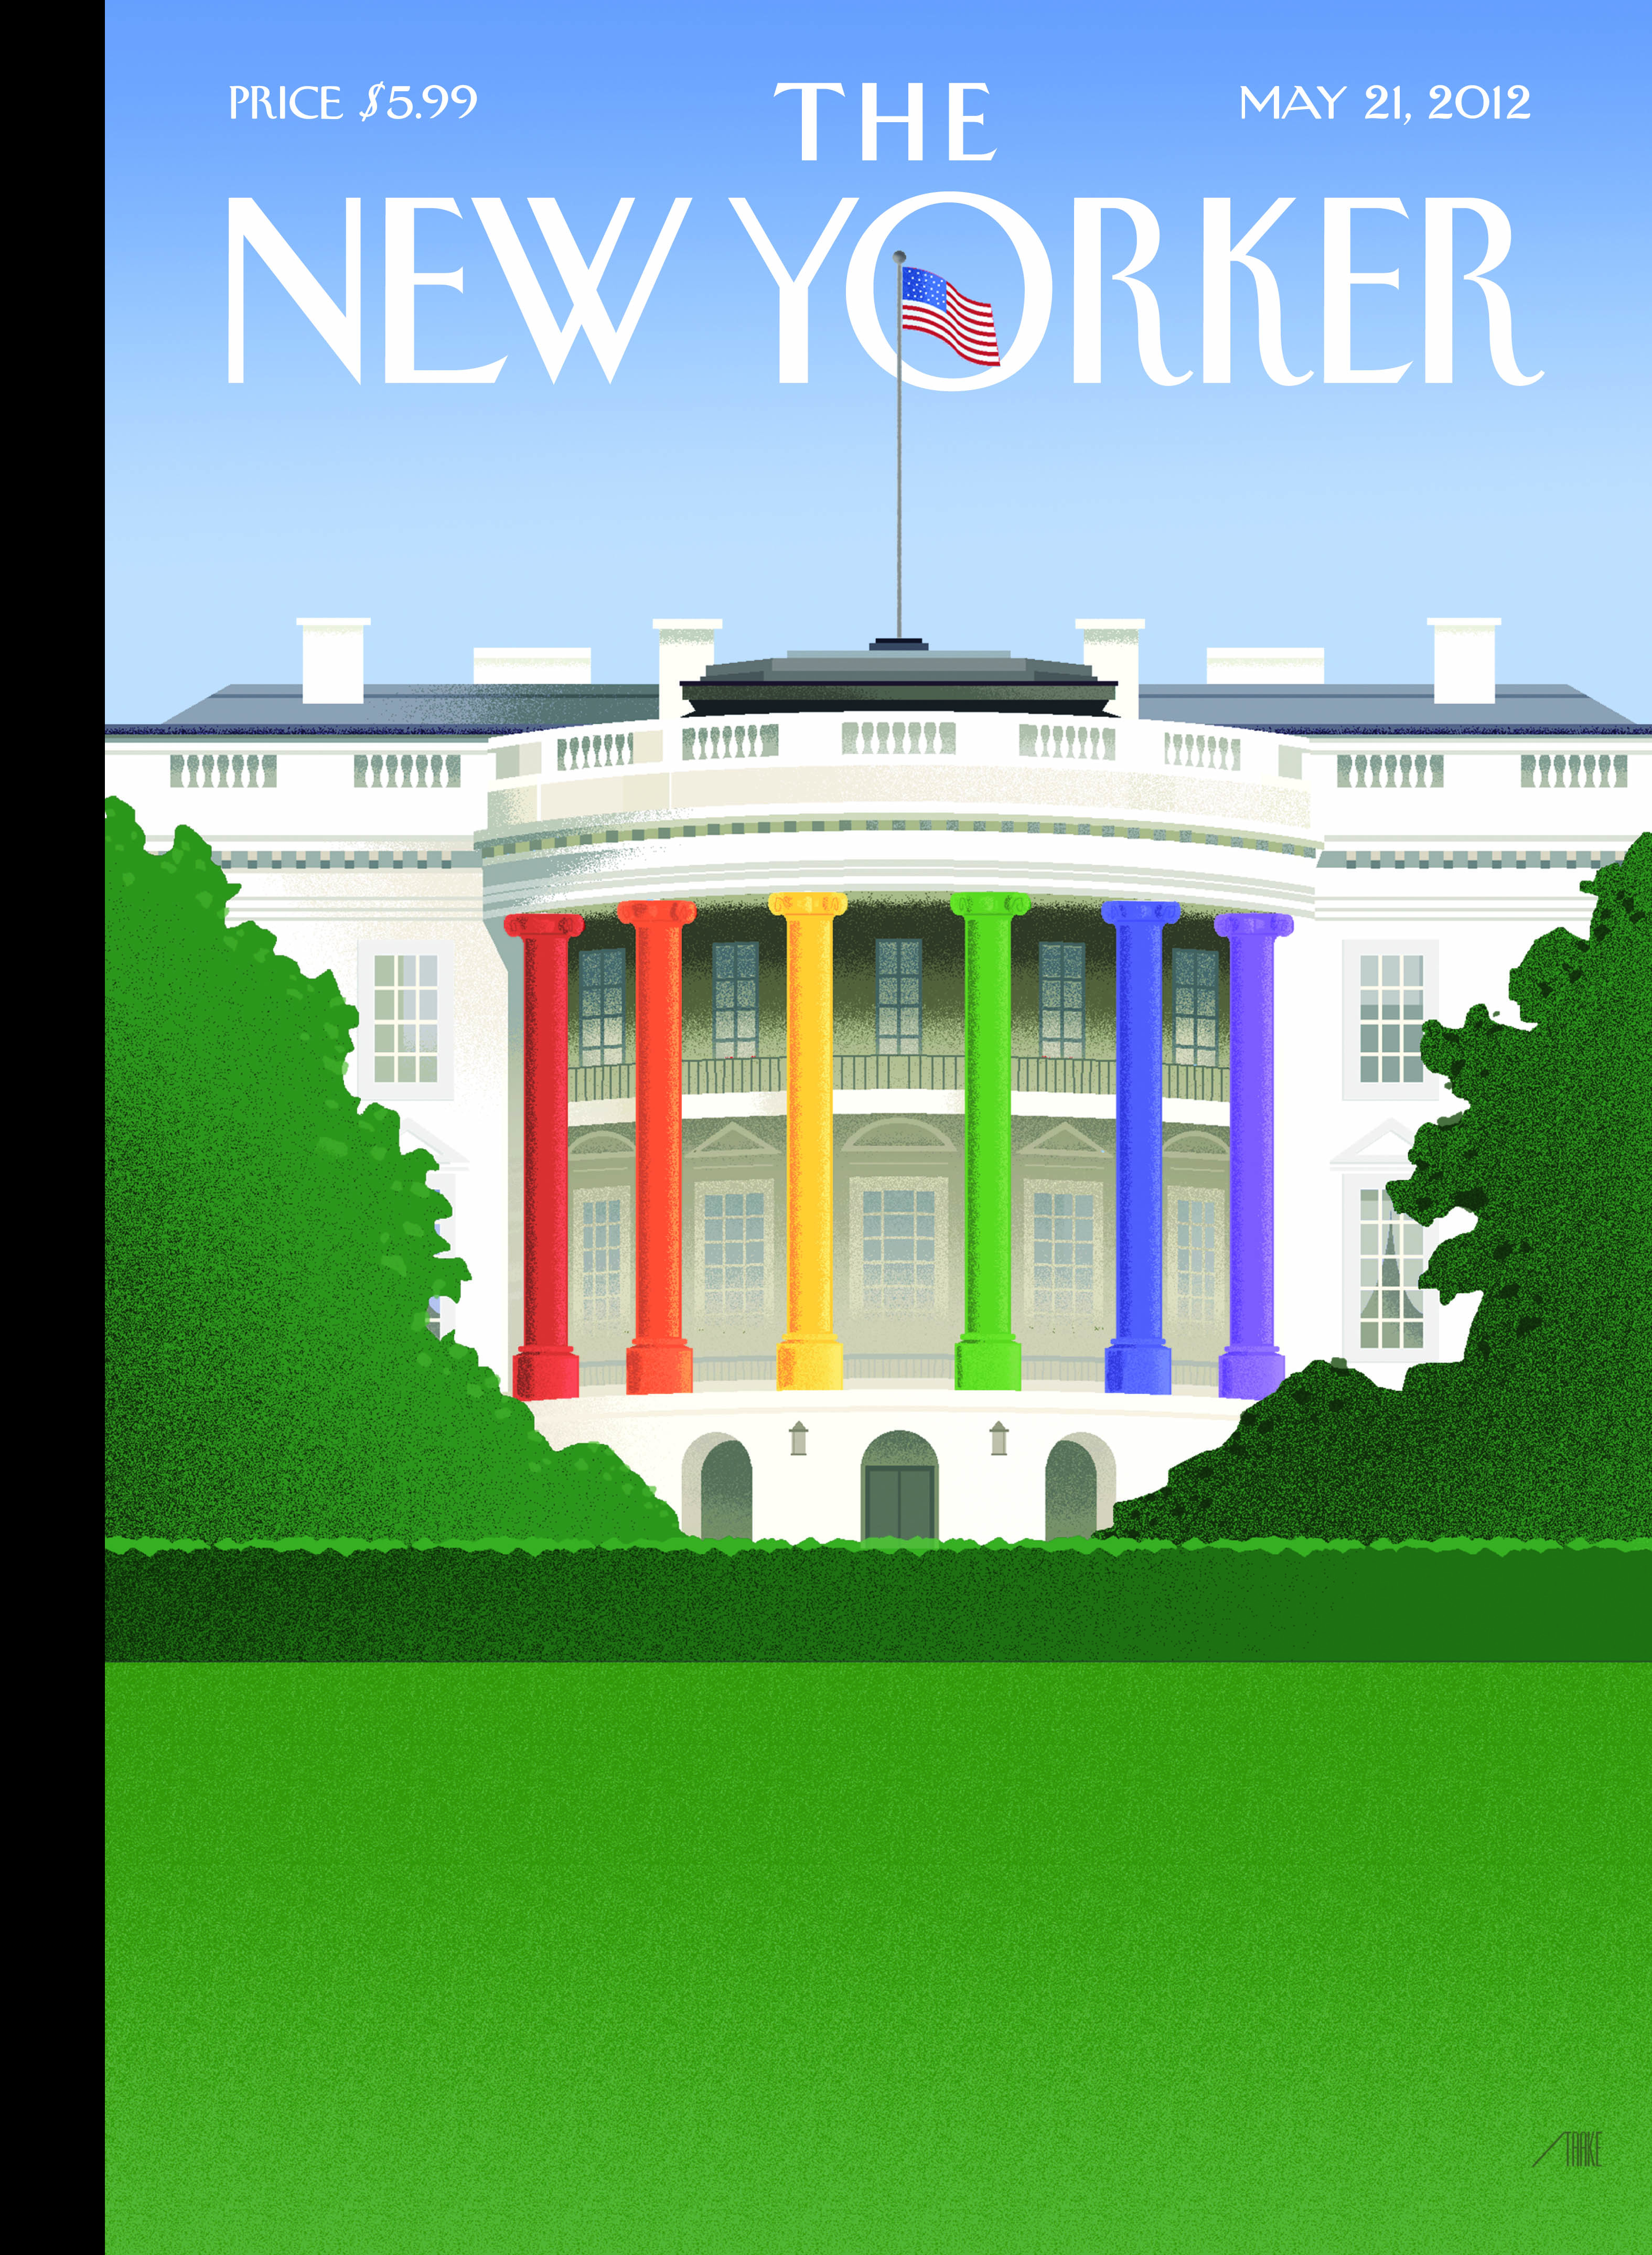 The New Yorker-May 21, 2012: "Spectrum of Light"